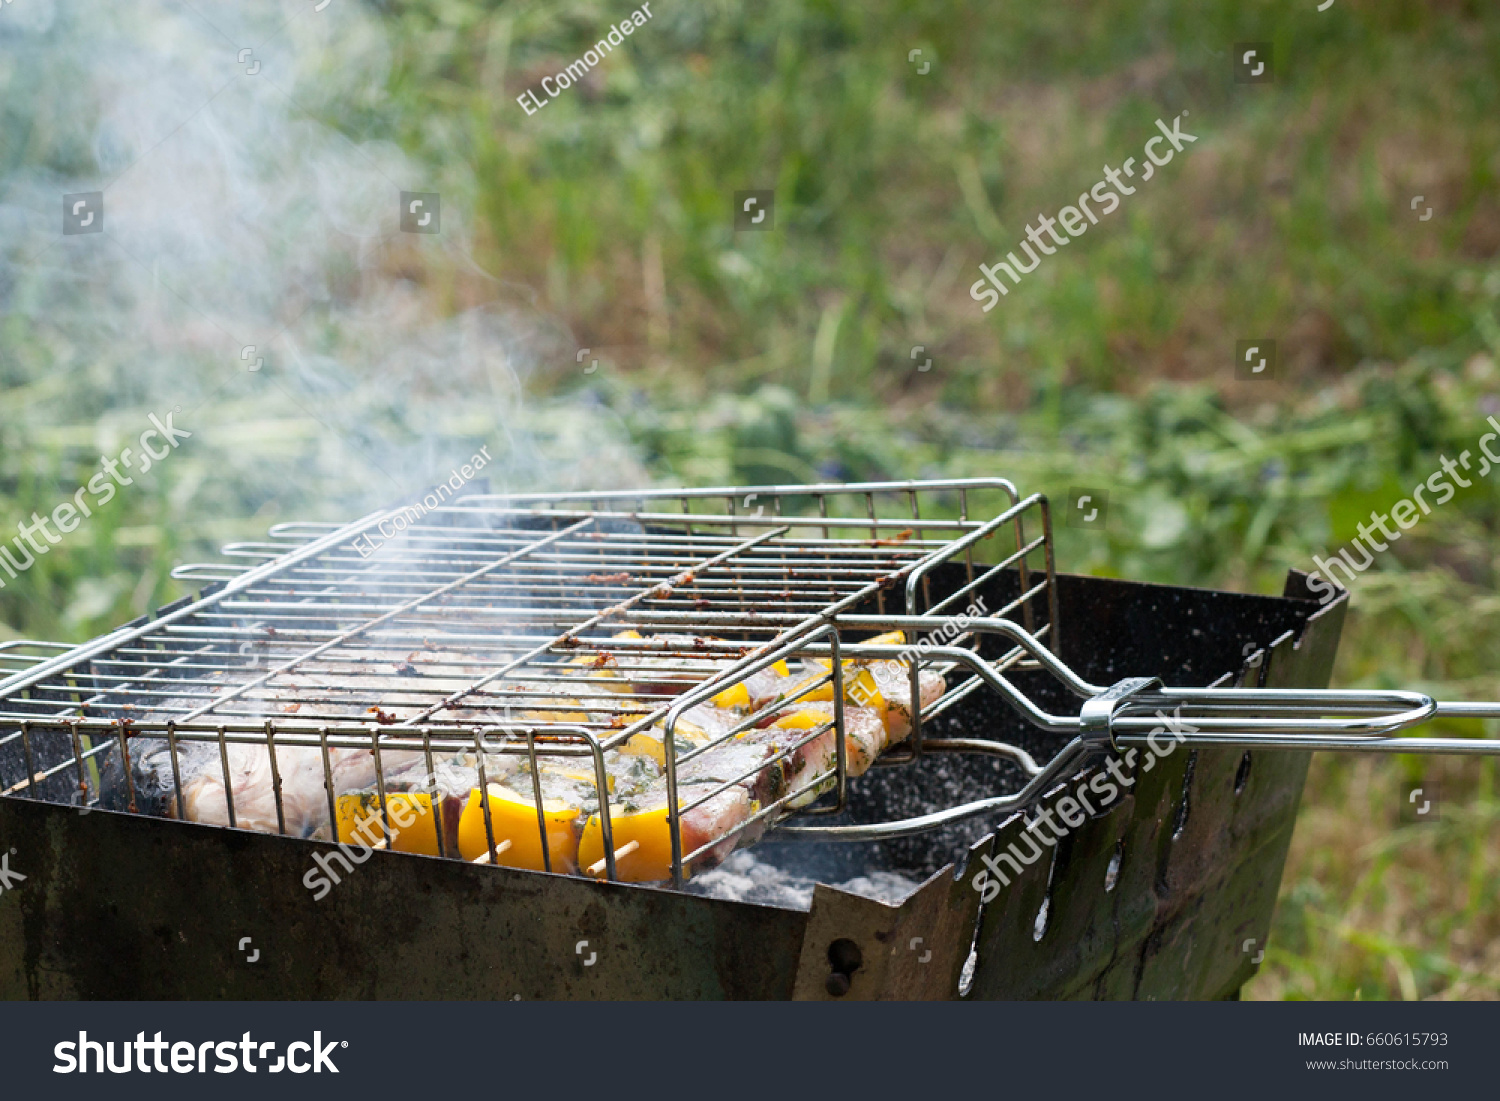 fish with vegetables and sweet pepper prepared on the grill grate in the iron grill in the garden during the summer sunny day #660615793